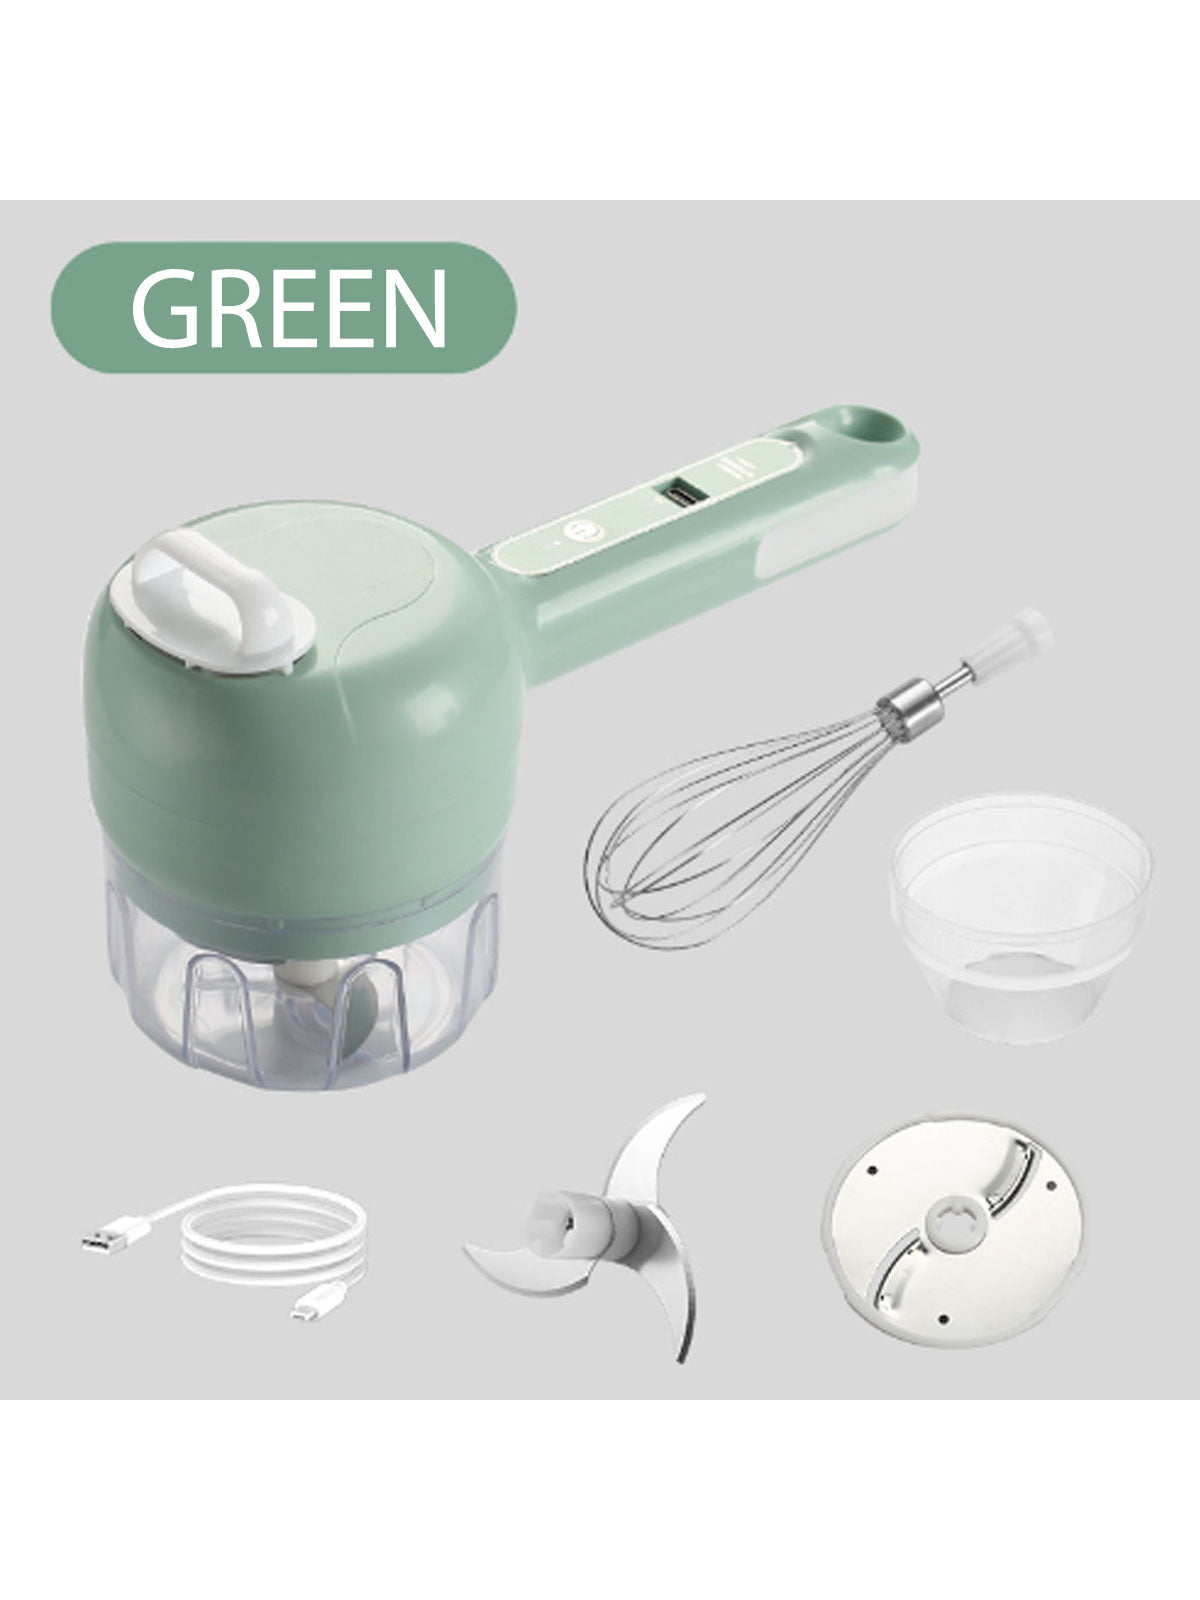 1pc ABS Meat Grinder, Modern Green Multifunctional Home Electric Vegetable Cutter For Kitchen